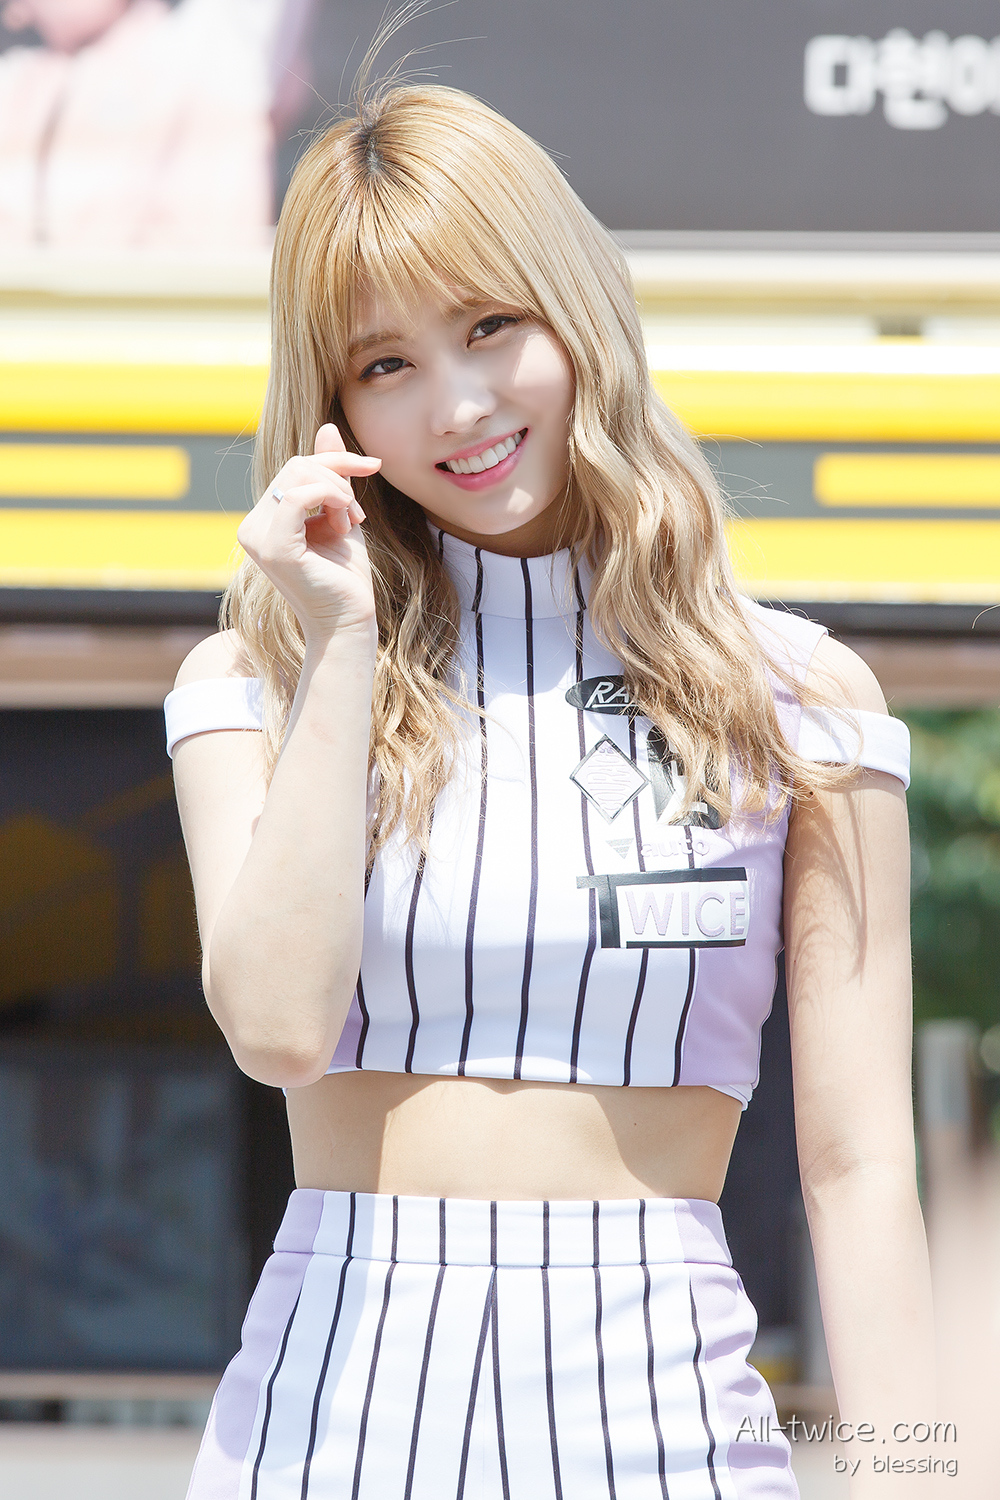 twice iphone wallpaper,clothing,beauty,waist,hairstyle,fashion